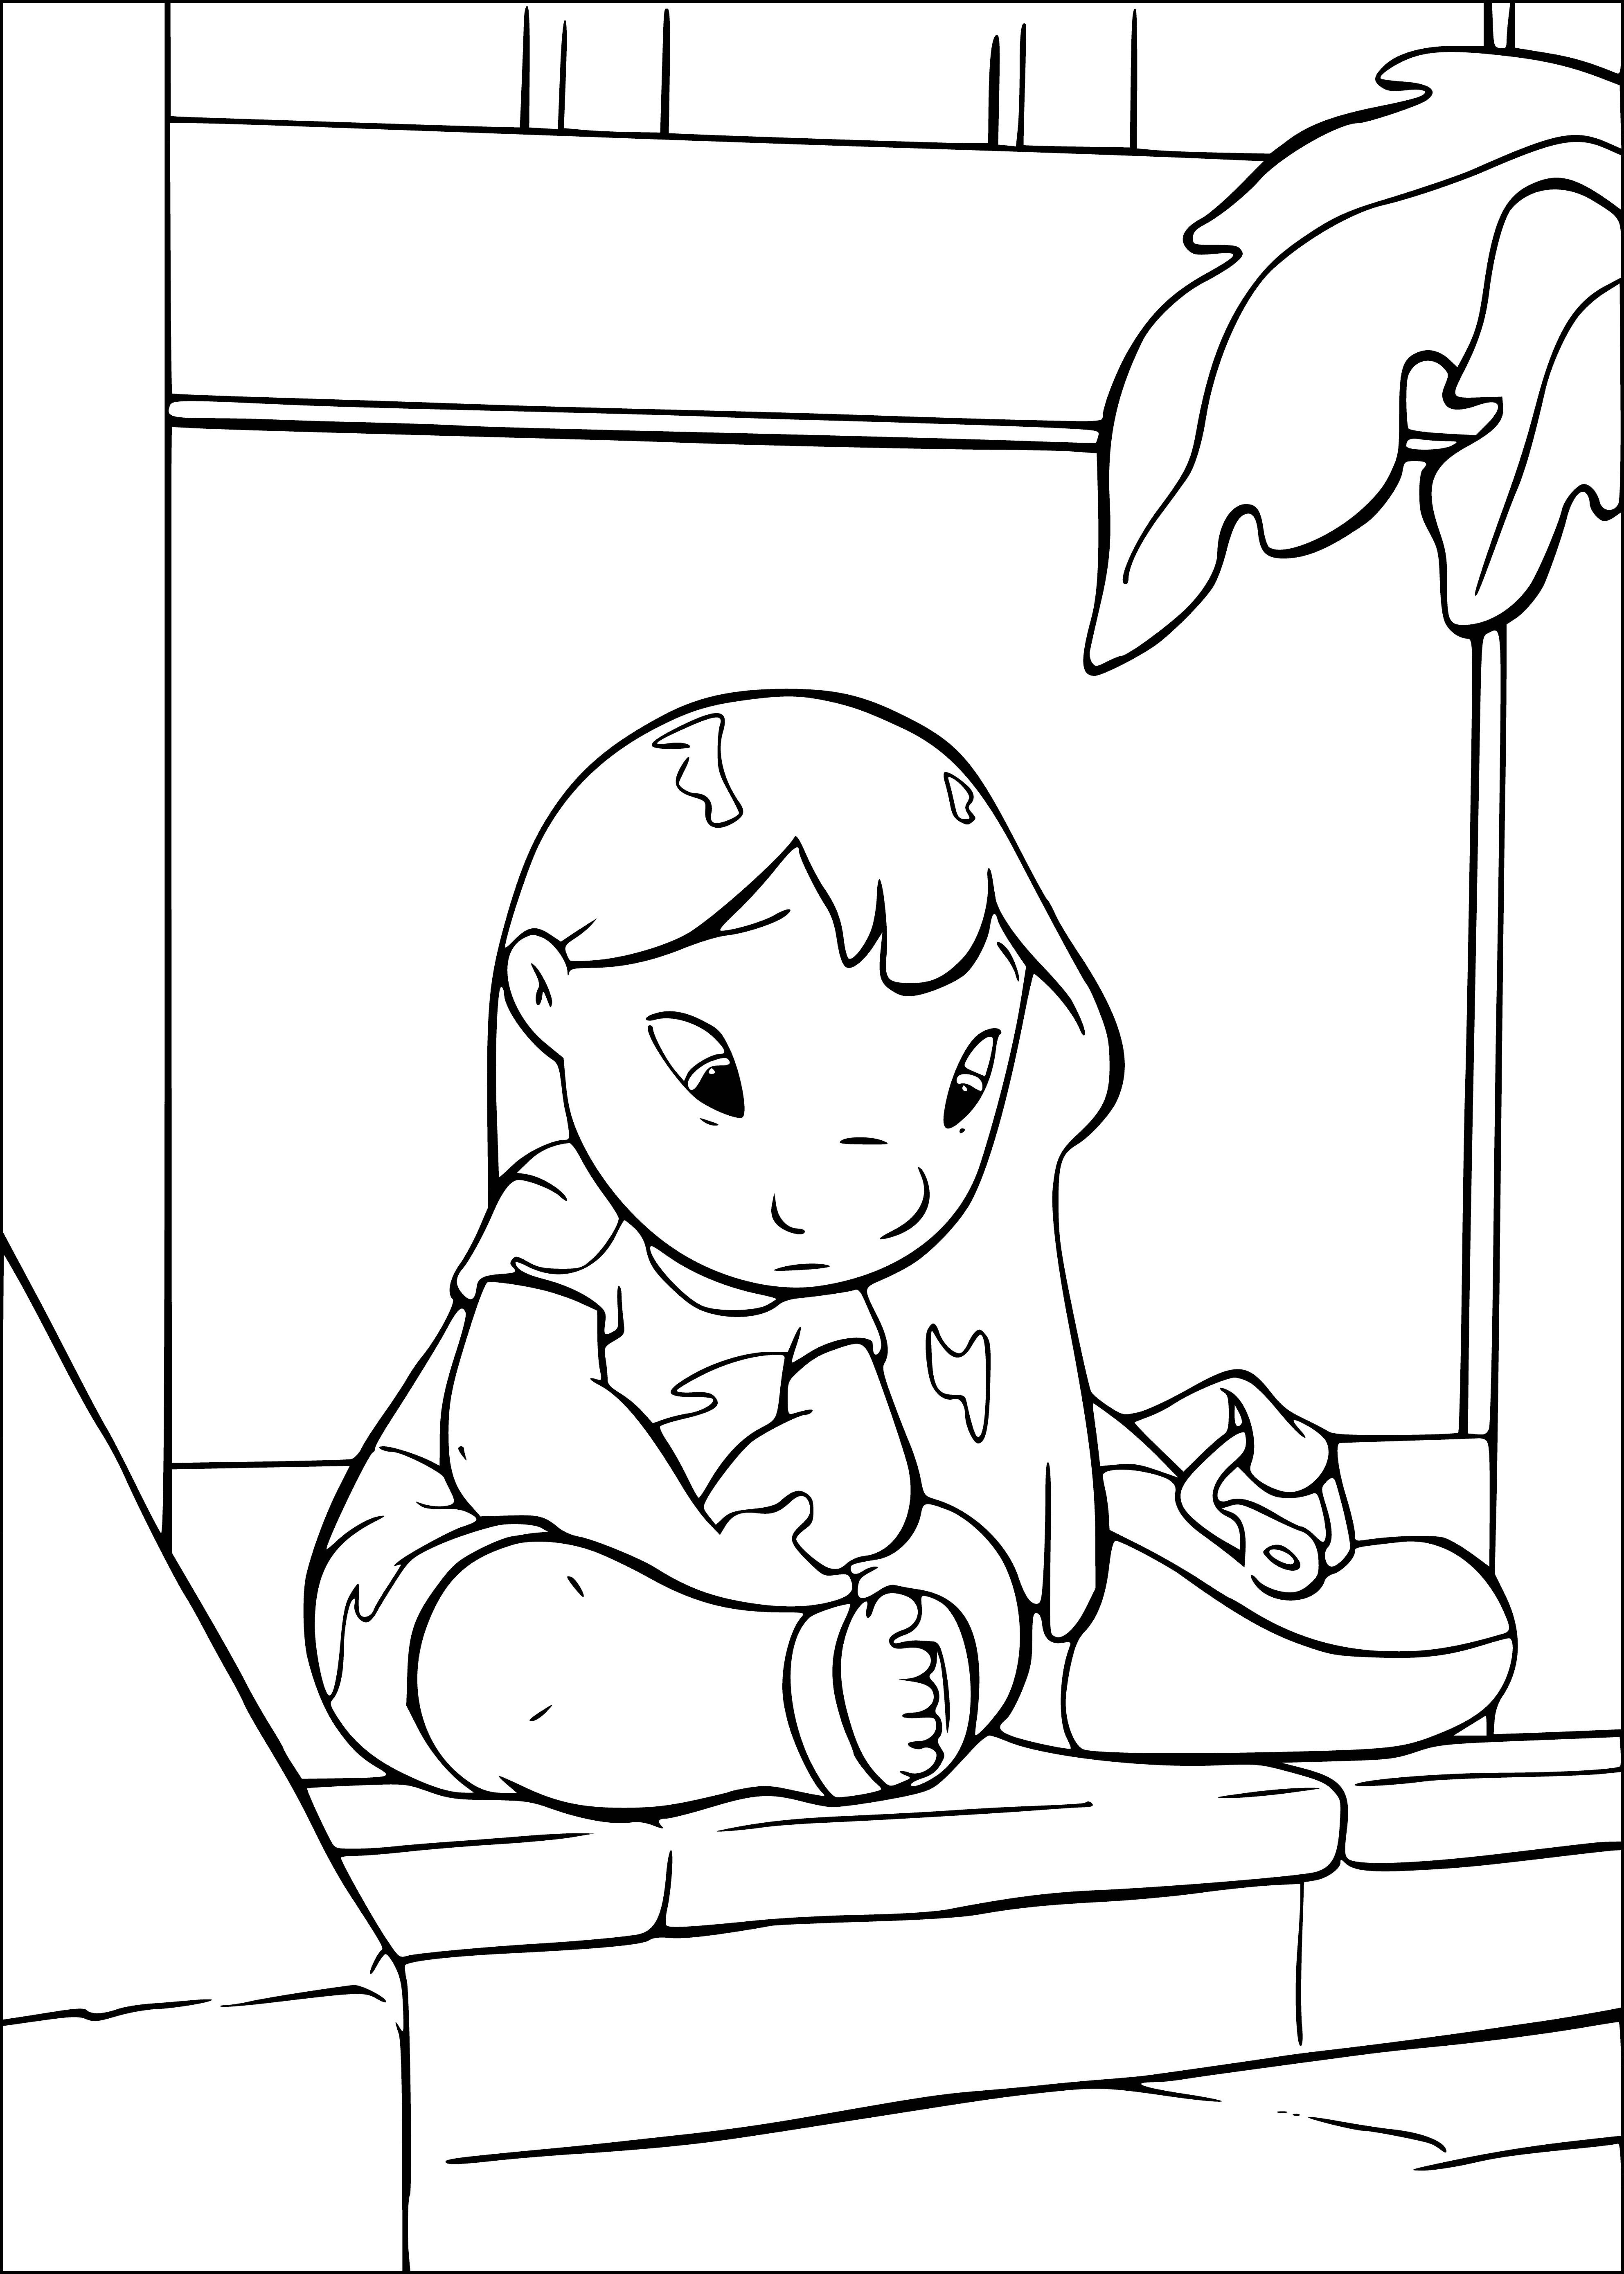 Lilo on the doorstep coloring page